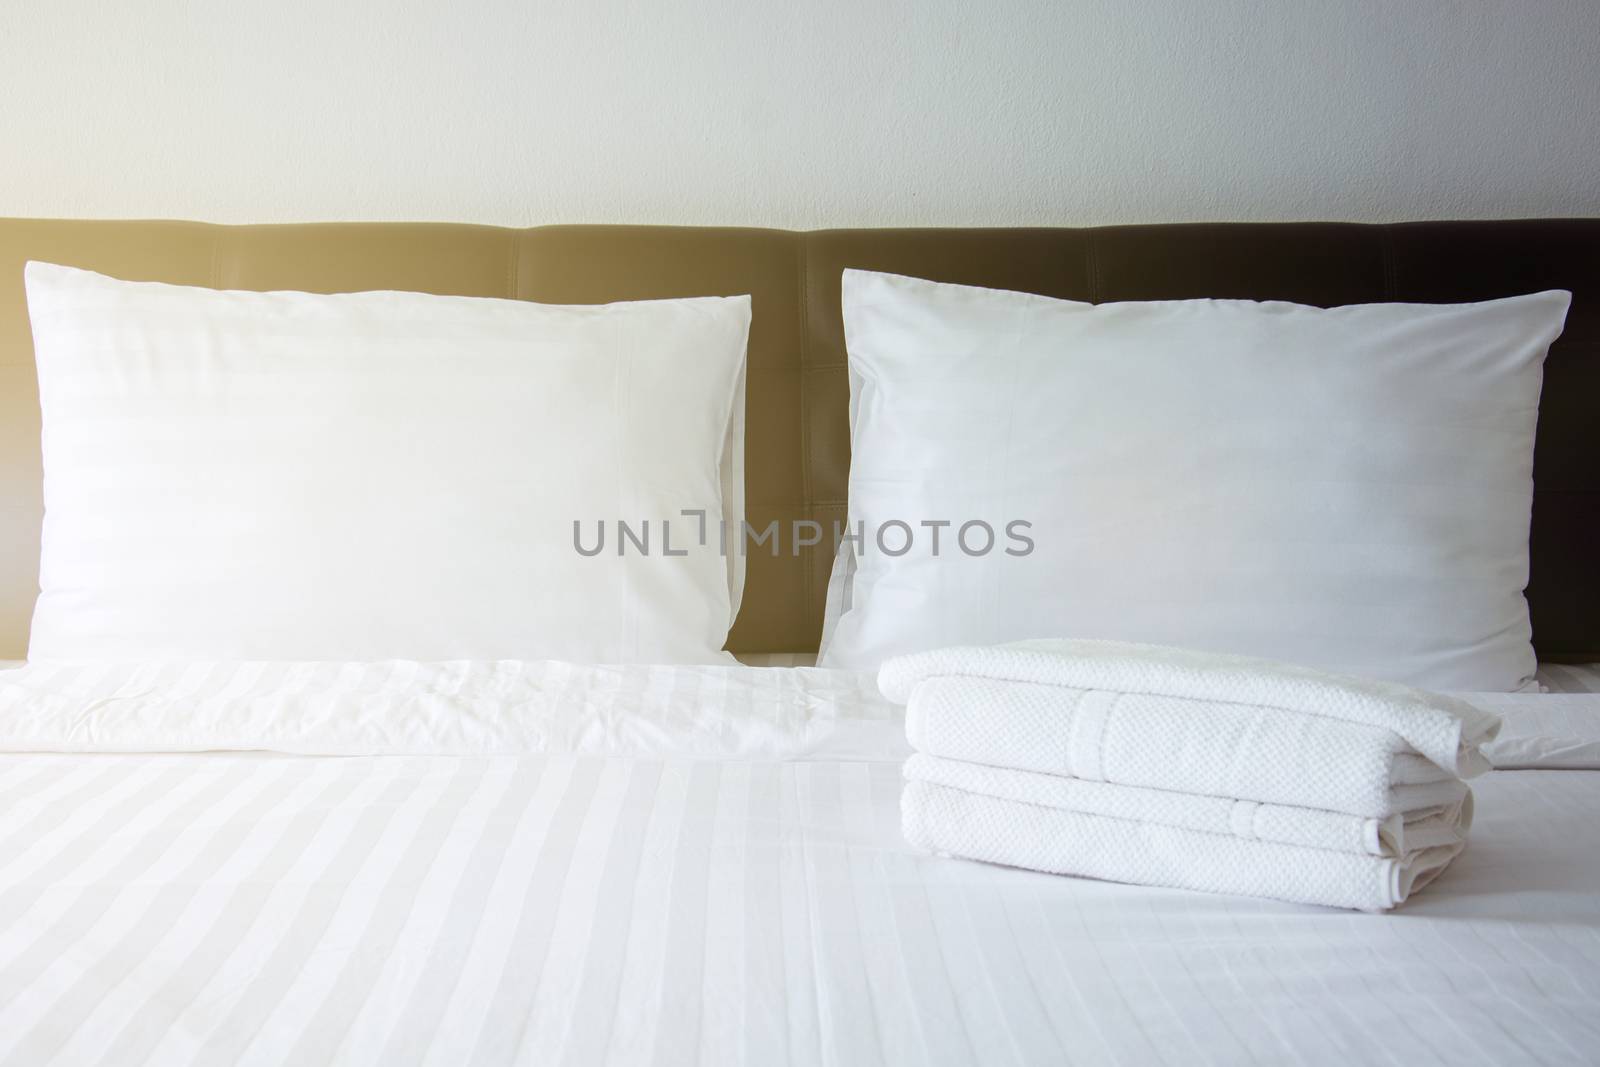 white pillow, white blanket and white towel on bed in bedroom with lighting upper left side